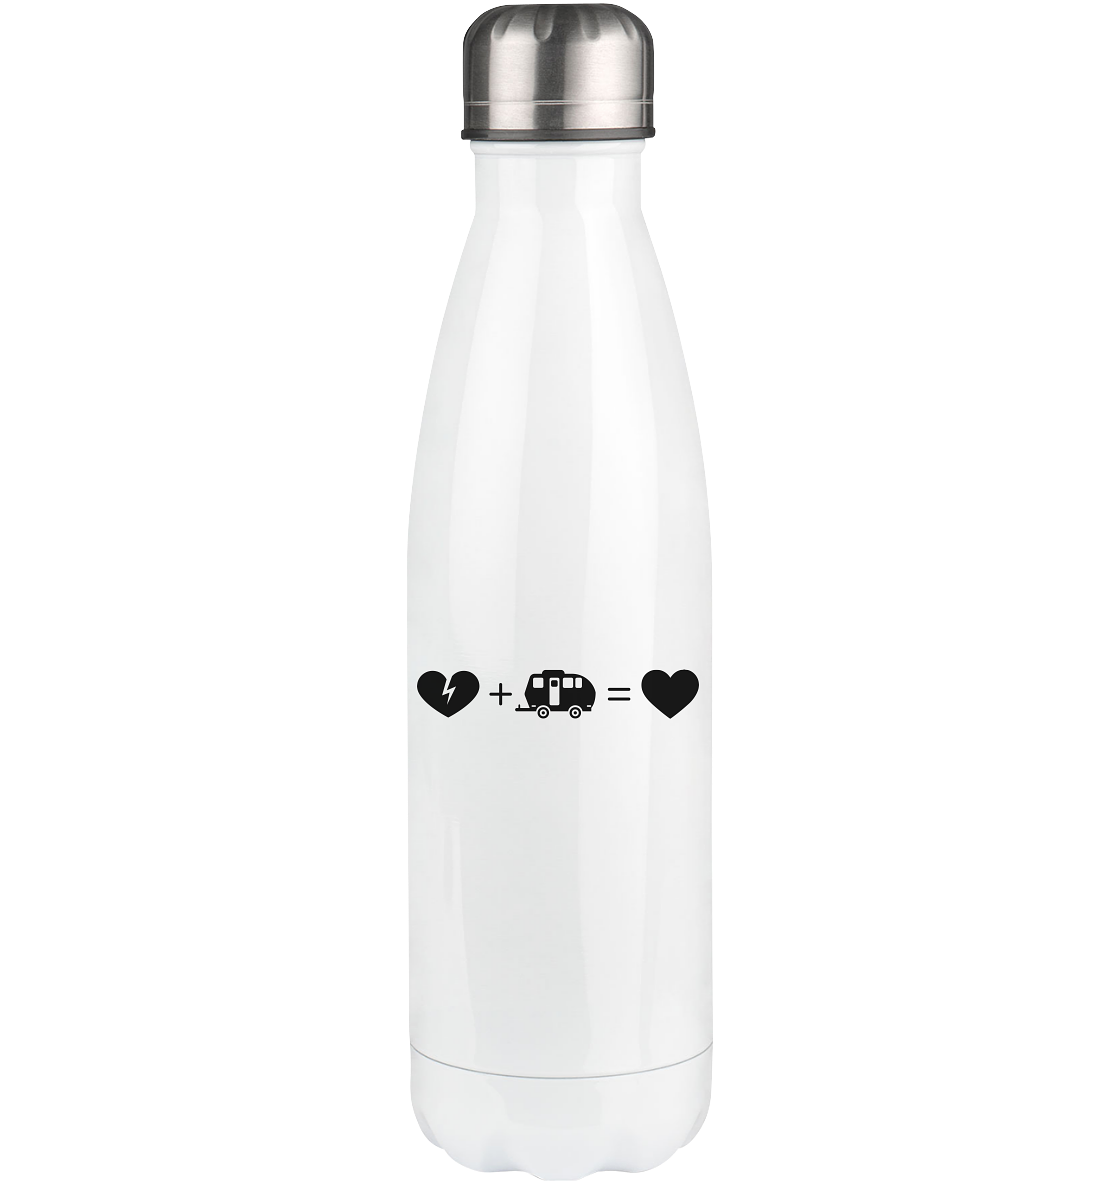 Broken Heart Heart and Camping 2 - Edelstahl Thermosflasche camping UONP 500ml